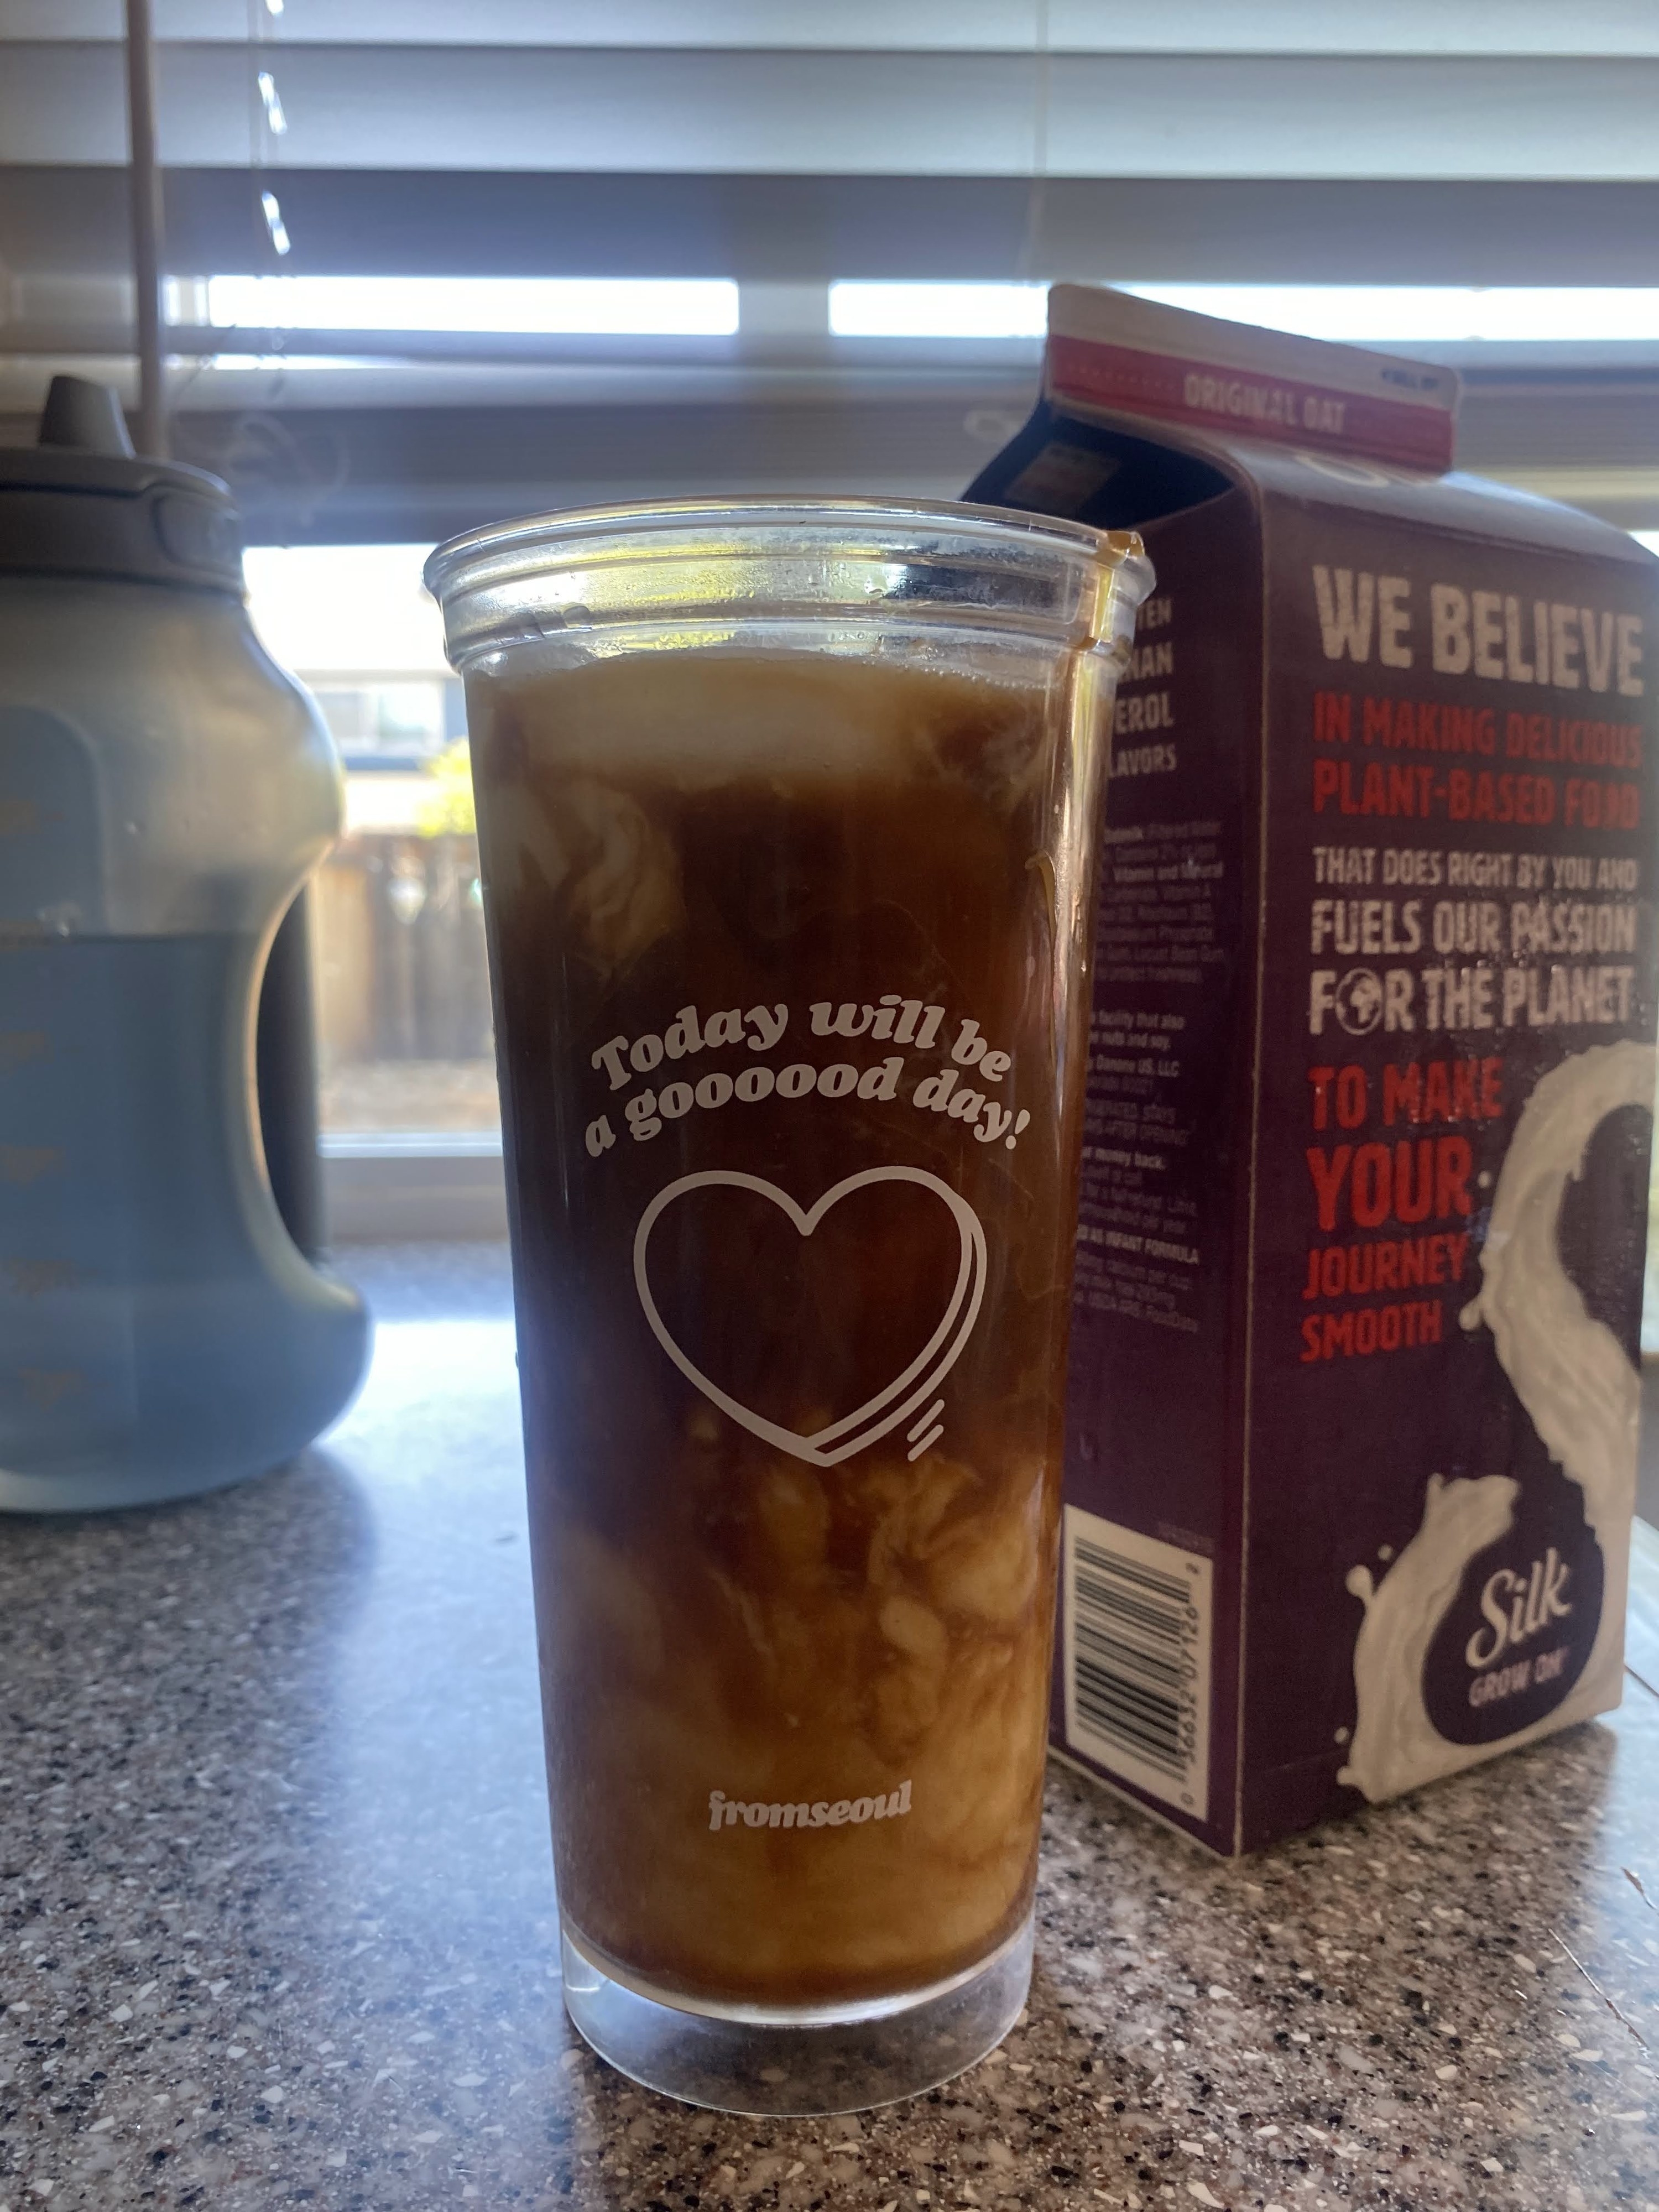 A photo of a cup of iced coffee, a water jug, and a carton of oat milk.